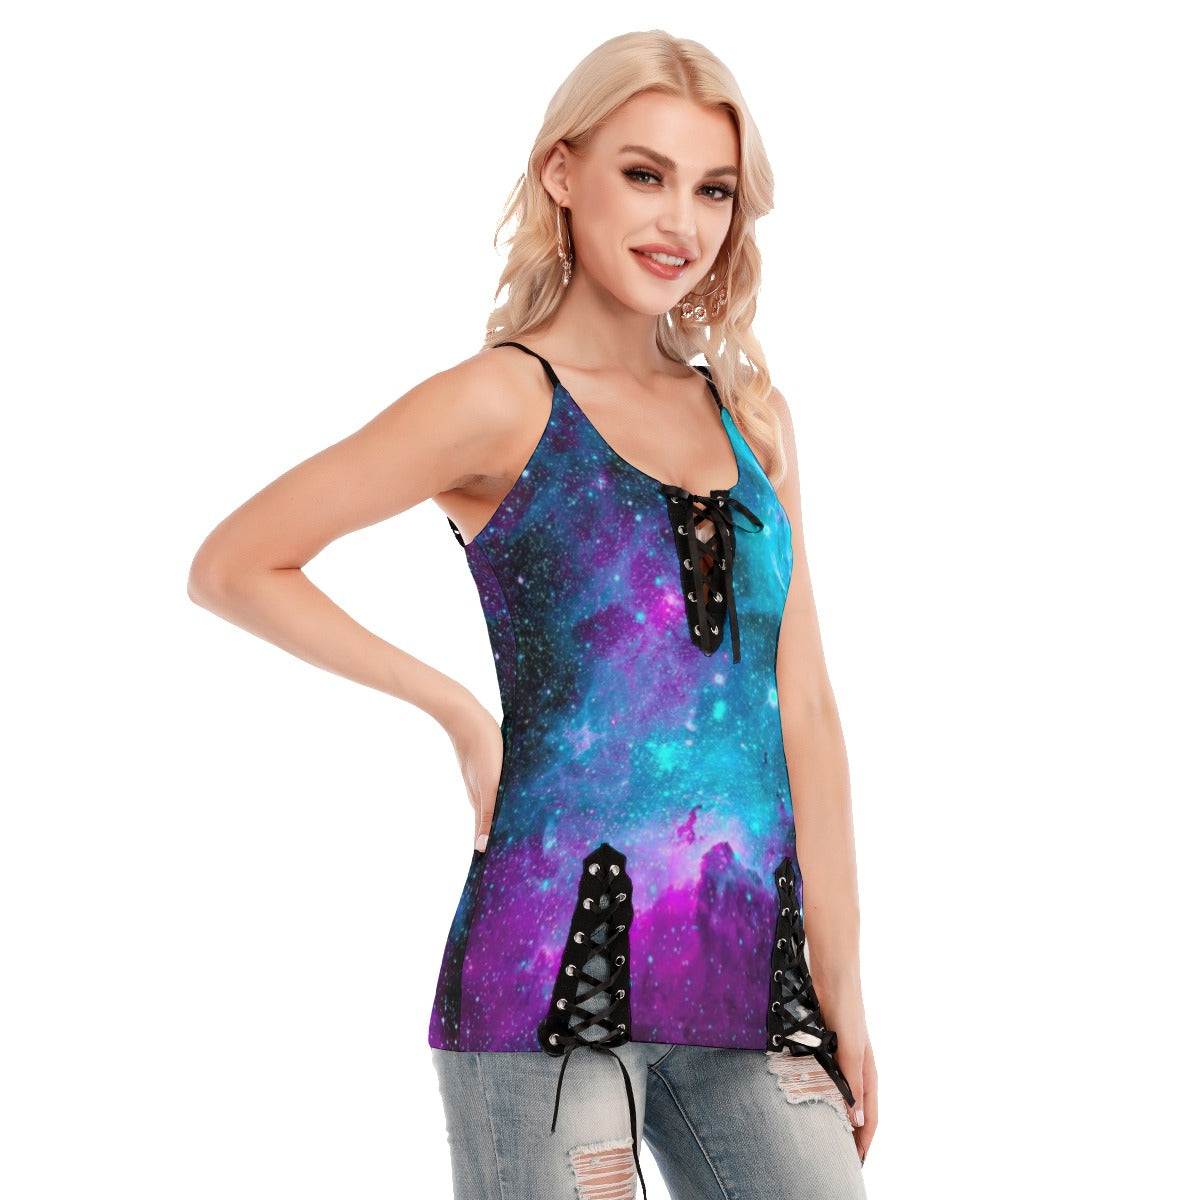 Stand out  with the  Galaxy Women's V-neck Eyelet Lace-up Shirt  available at Hey Nugget. Grab yours today!